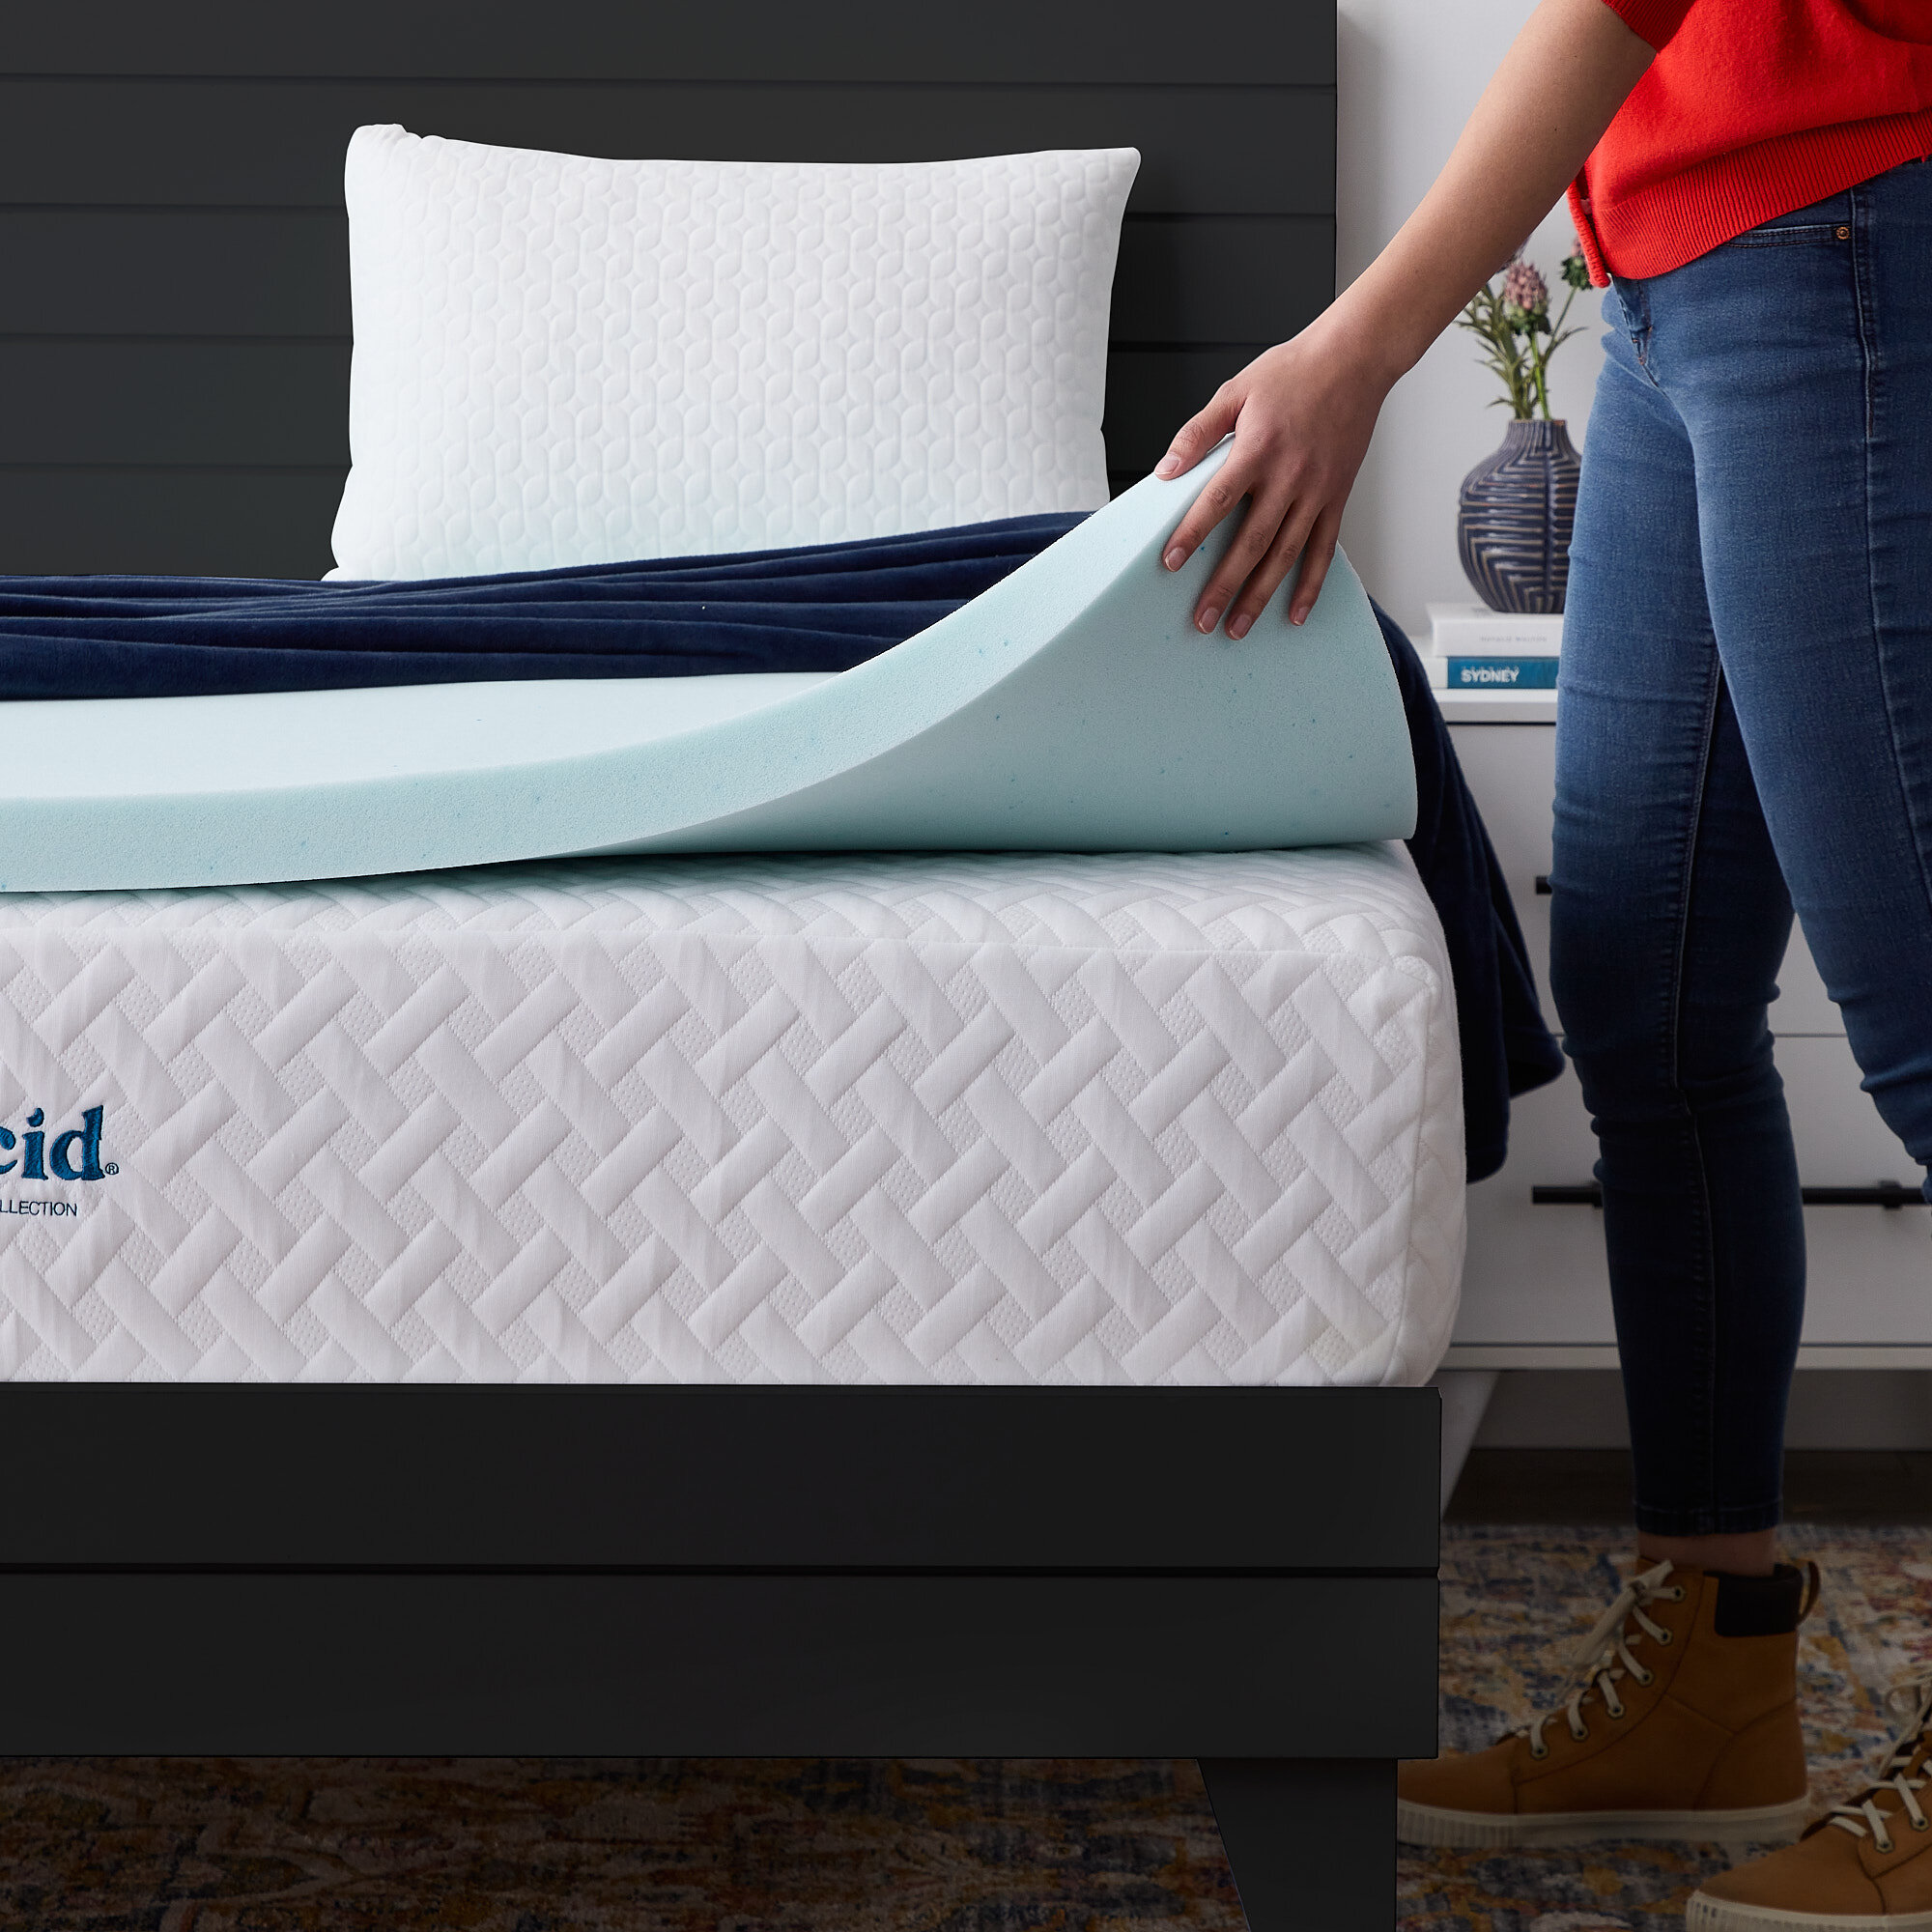 Lauraland Memory Foam Mattress Topper Twin XL CertiPUR-US 2-Inch Active Cooling Design Bed Topper with Removable Hypoallergenic Cover